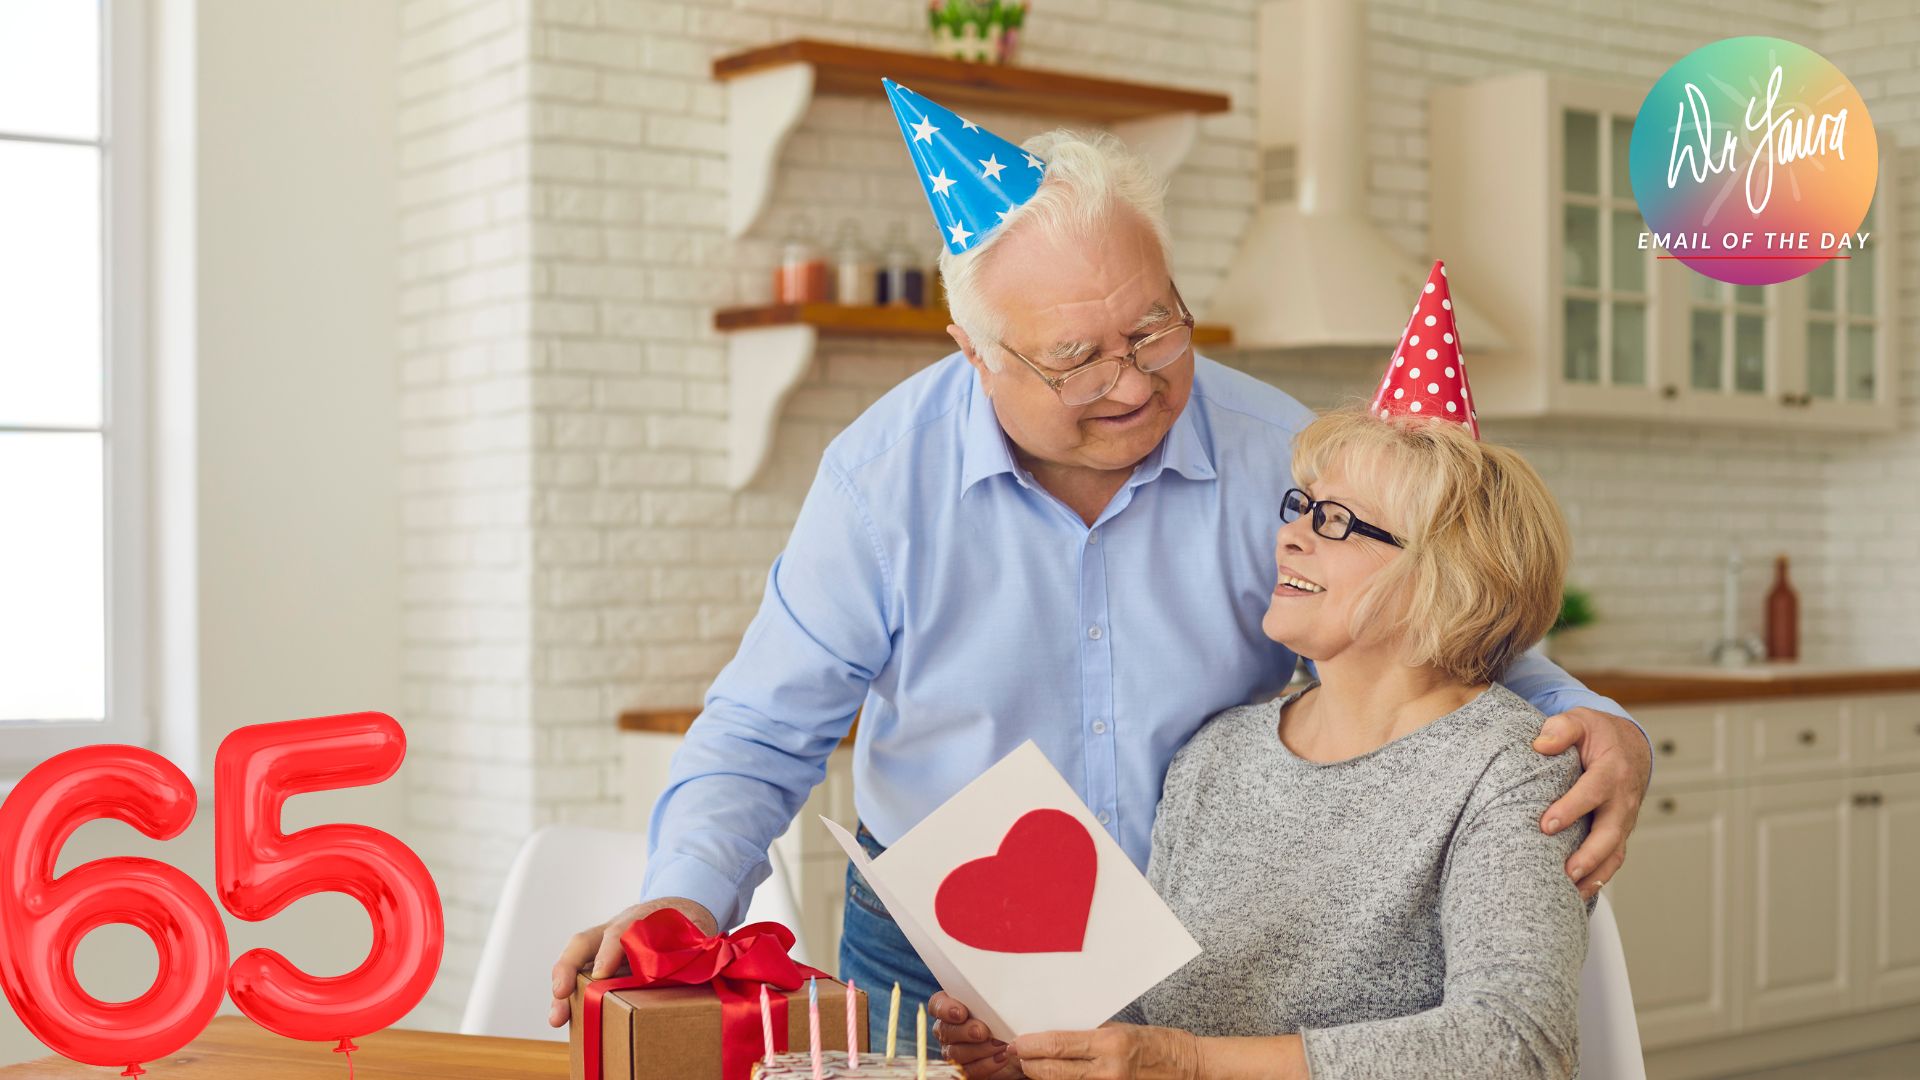 Man wearing birthday hat looks down at woman wearing birthday hat and opening card while sitting at table with a present, cake, and '65' balloons